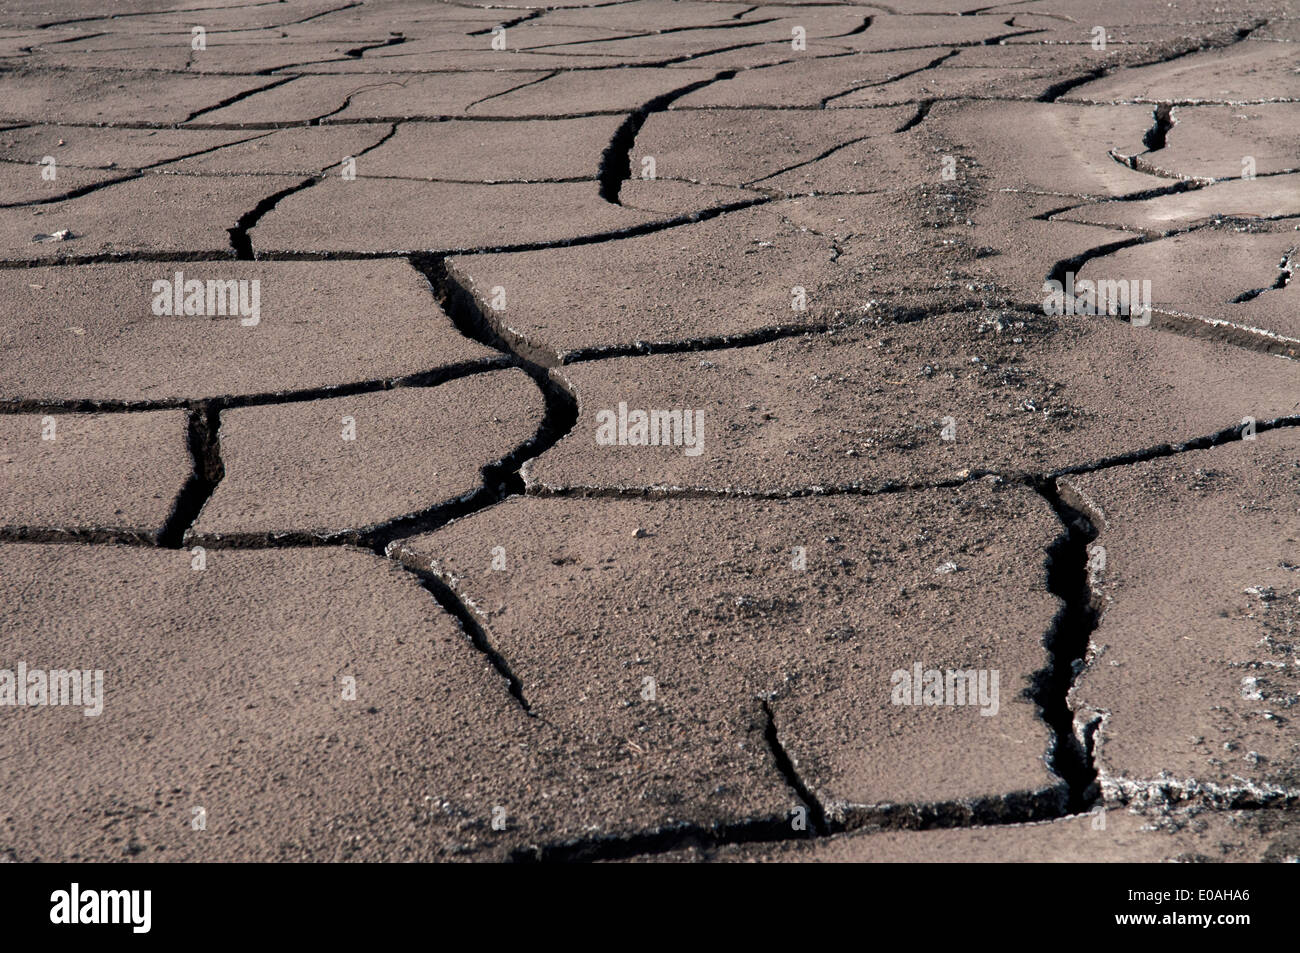 Cracked black soil, Luoping area, Yunnan, China Stock Photo